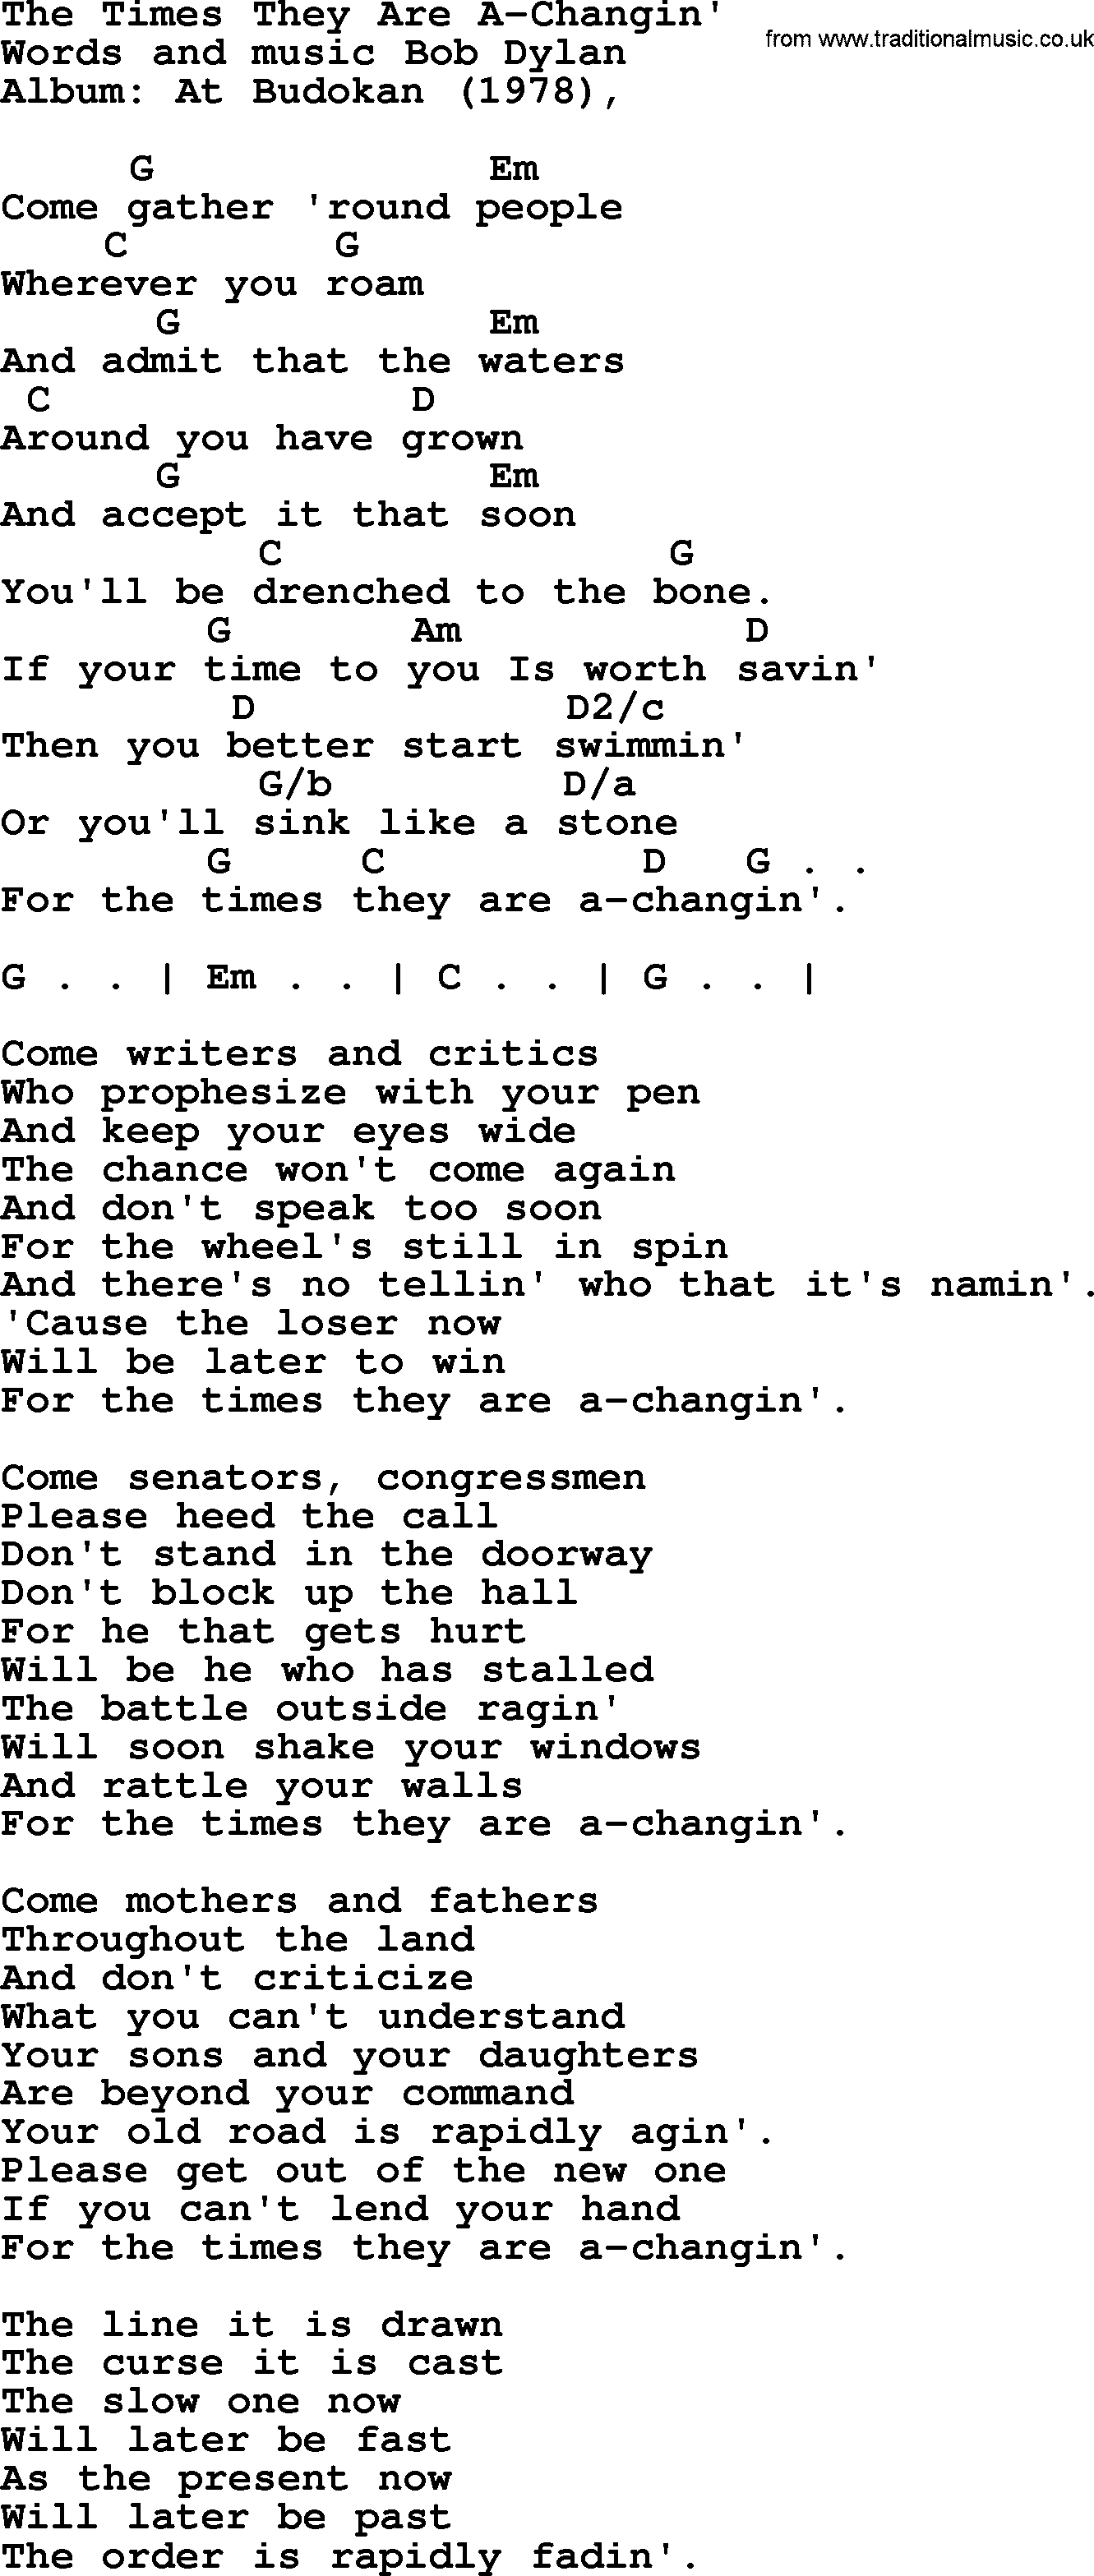 Bob Dylan song, lyrics with chords - The Times They Are A-Changin'